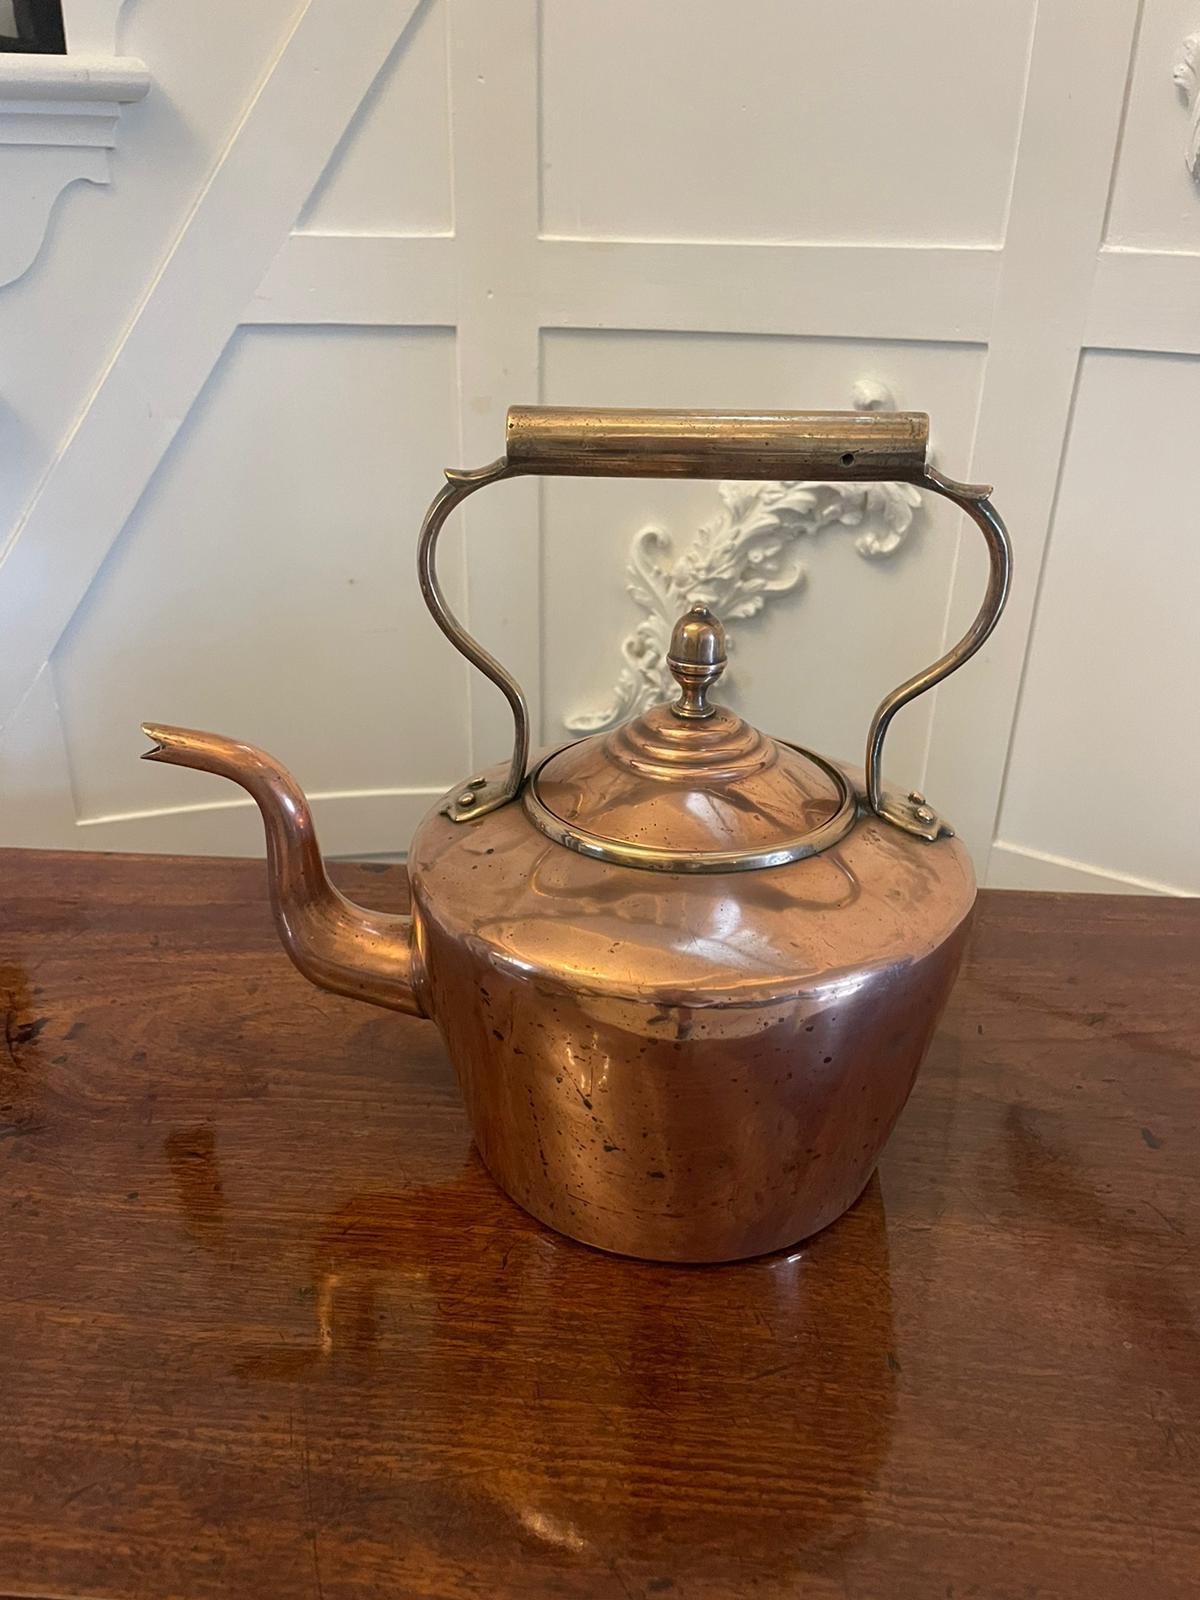 Antique George III quality copper kettle with a shaped handle, spout lift and lift off lid


We have a large stock of copper kettles of different sizes, please ask for further details


Dimensions:
Height 29 cm (11.41 in)
Width 31 cm (12.20